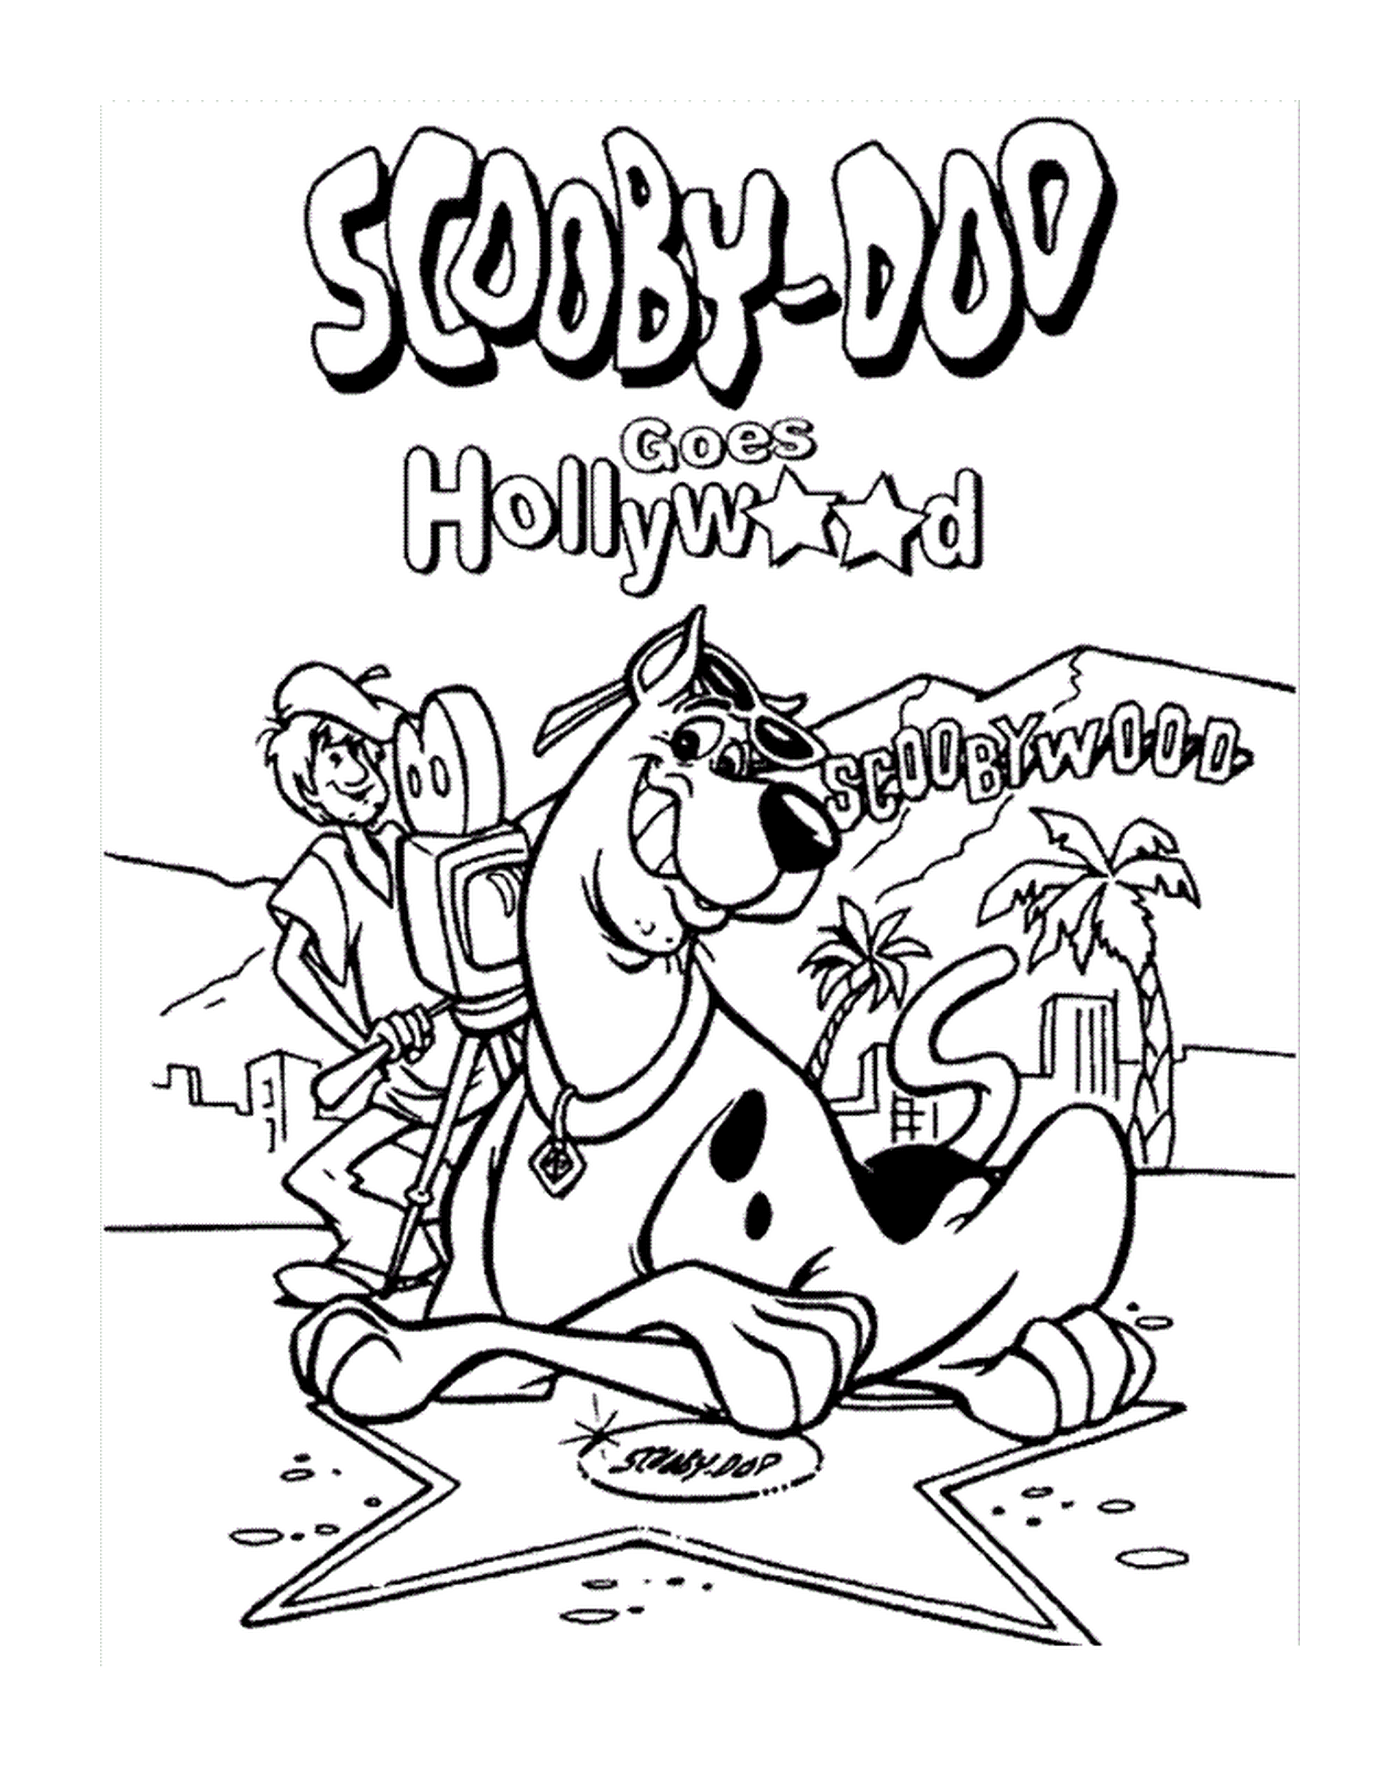  Scooby Doo a Hollywood 